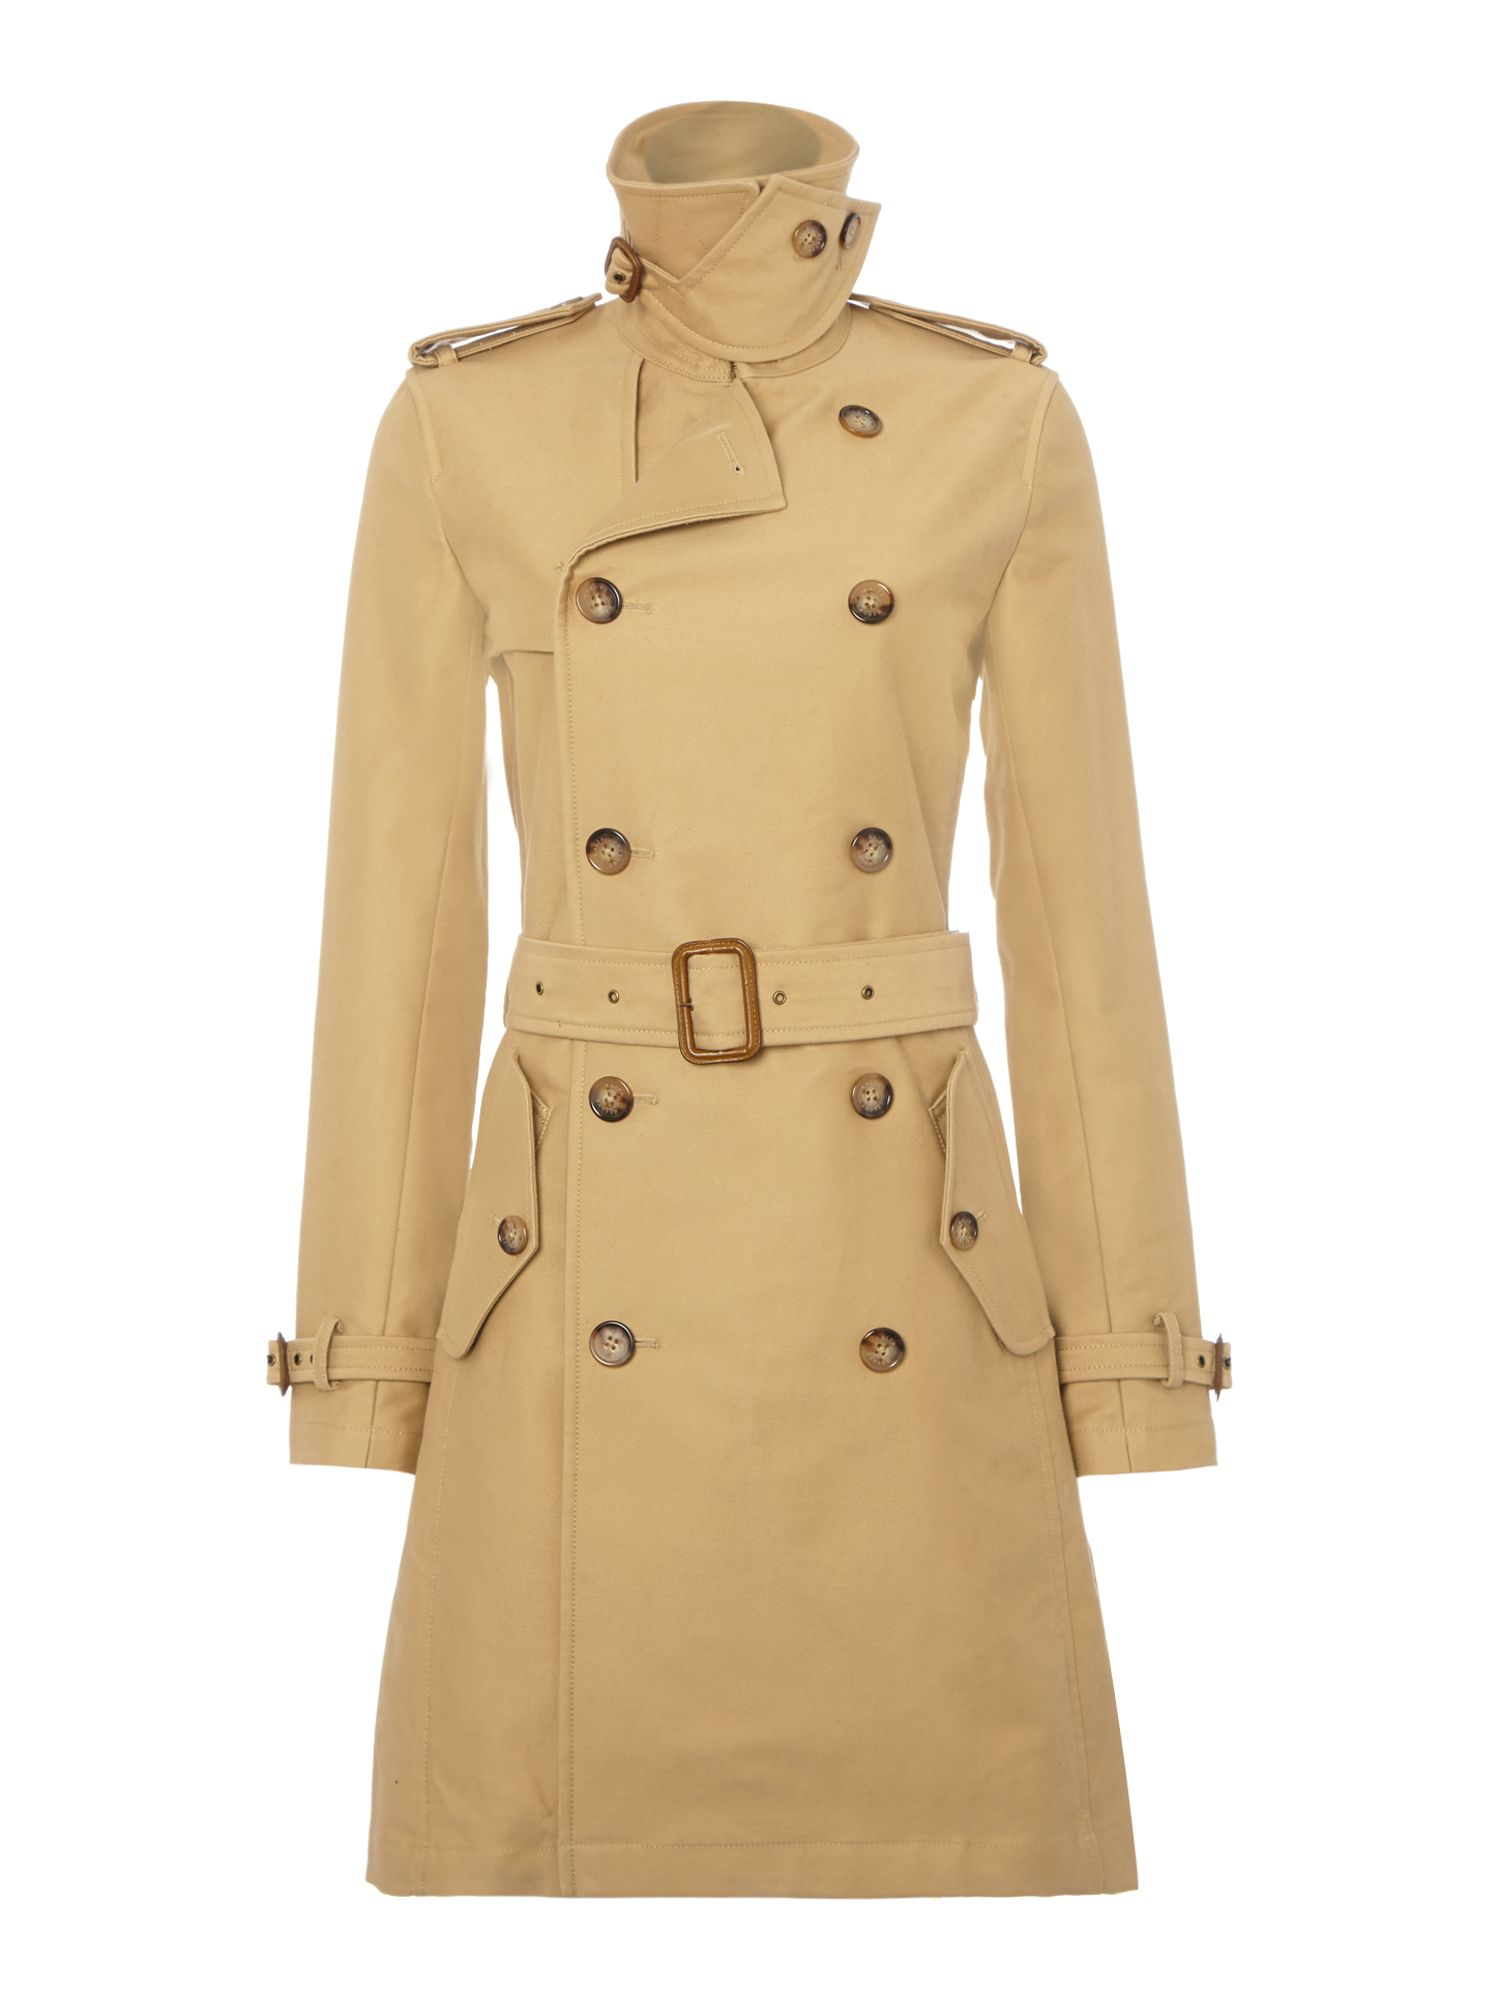 Polo ralph lauren Slim Fit Classic Trench Coat in Natural | Lyst